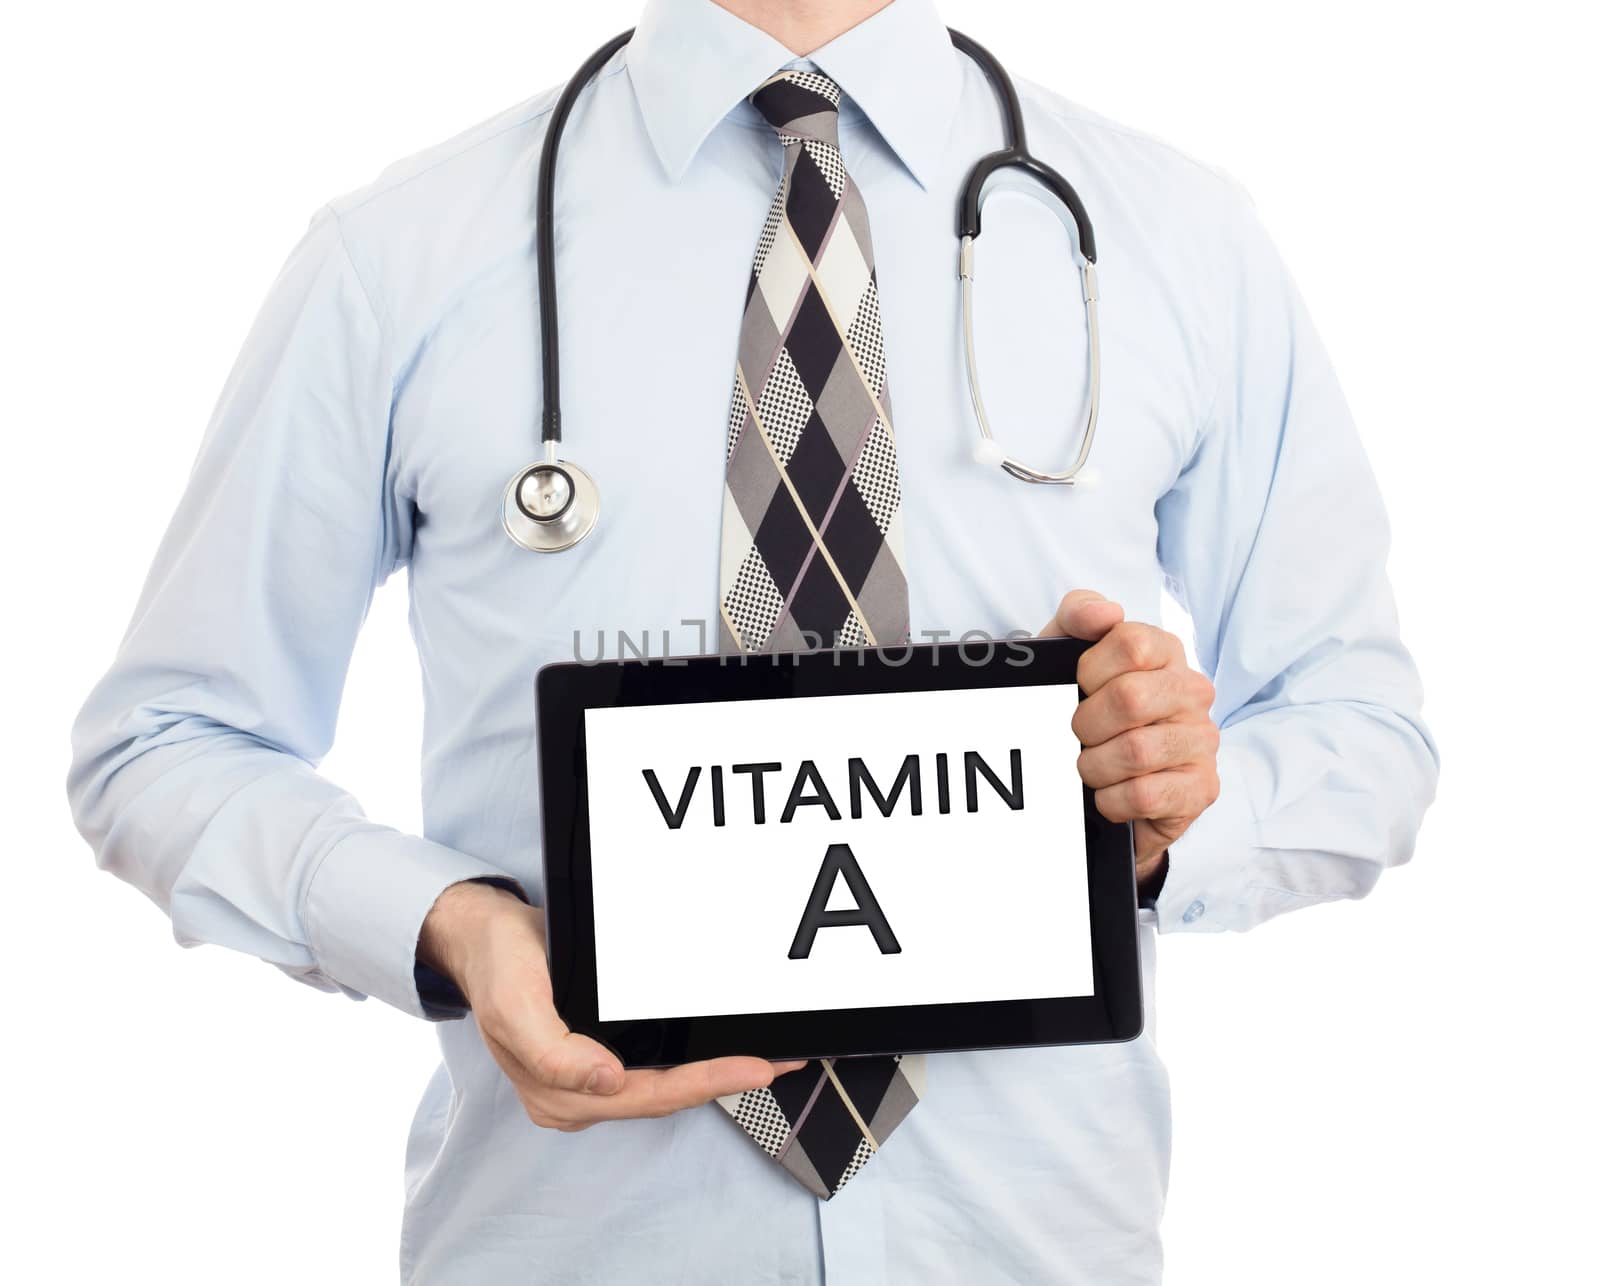 Doctor holding tablet - Vitamin A by michaklootwijk